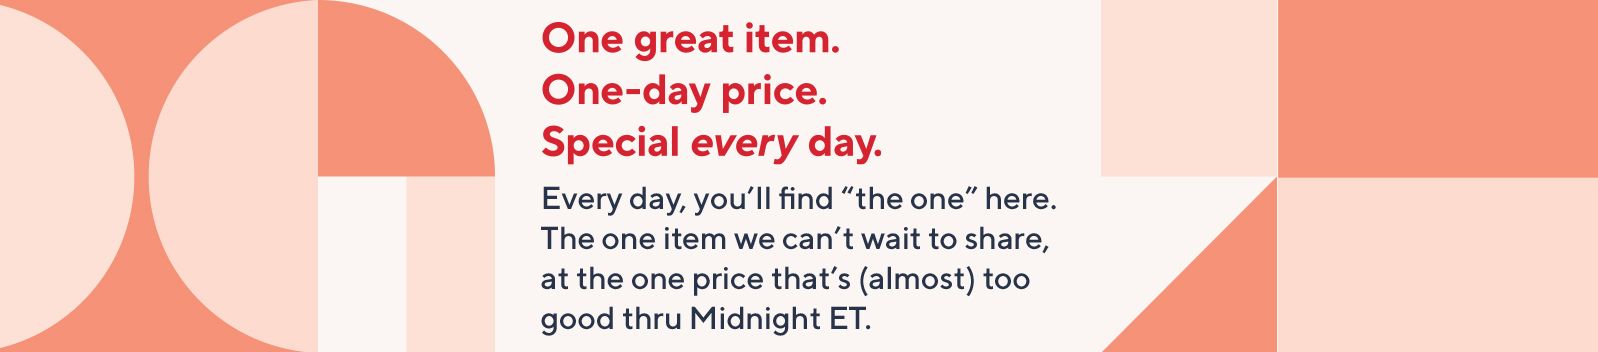 One great item. One-day price. Special every day. Every day, you’ll find “the one” here. The one item we can’t wait to share, at the one price that’s (almost) too good thru Midnight ET.